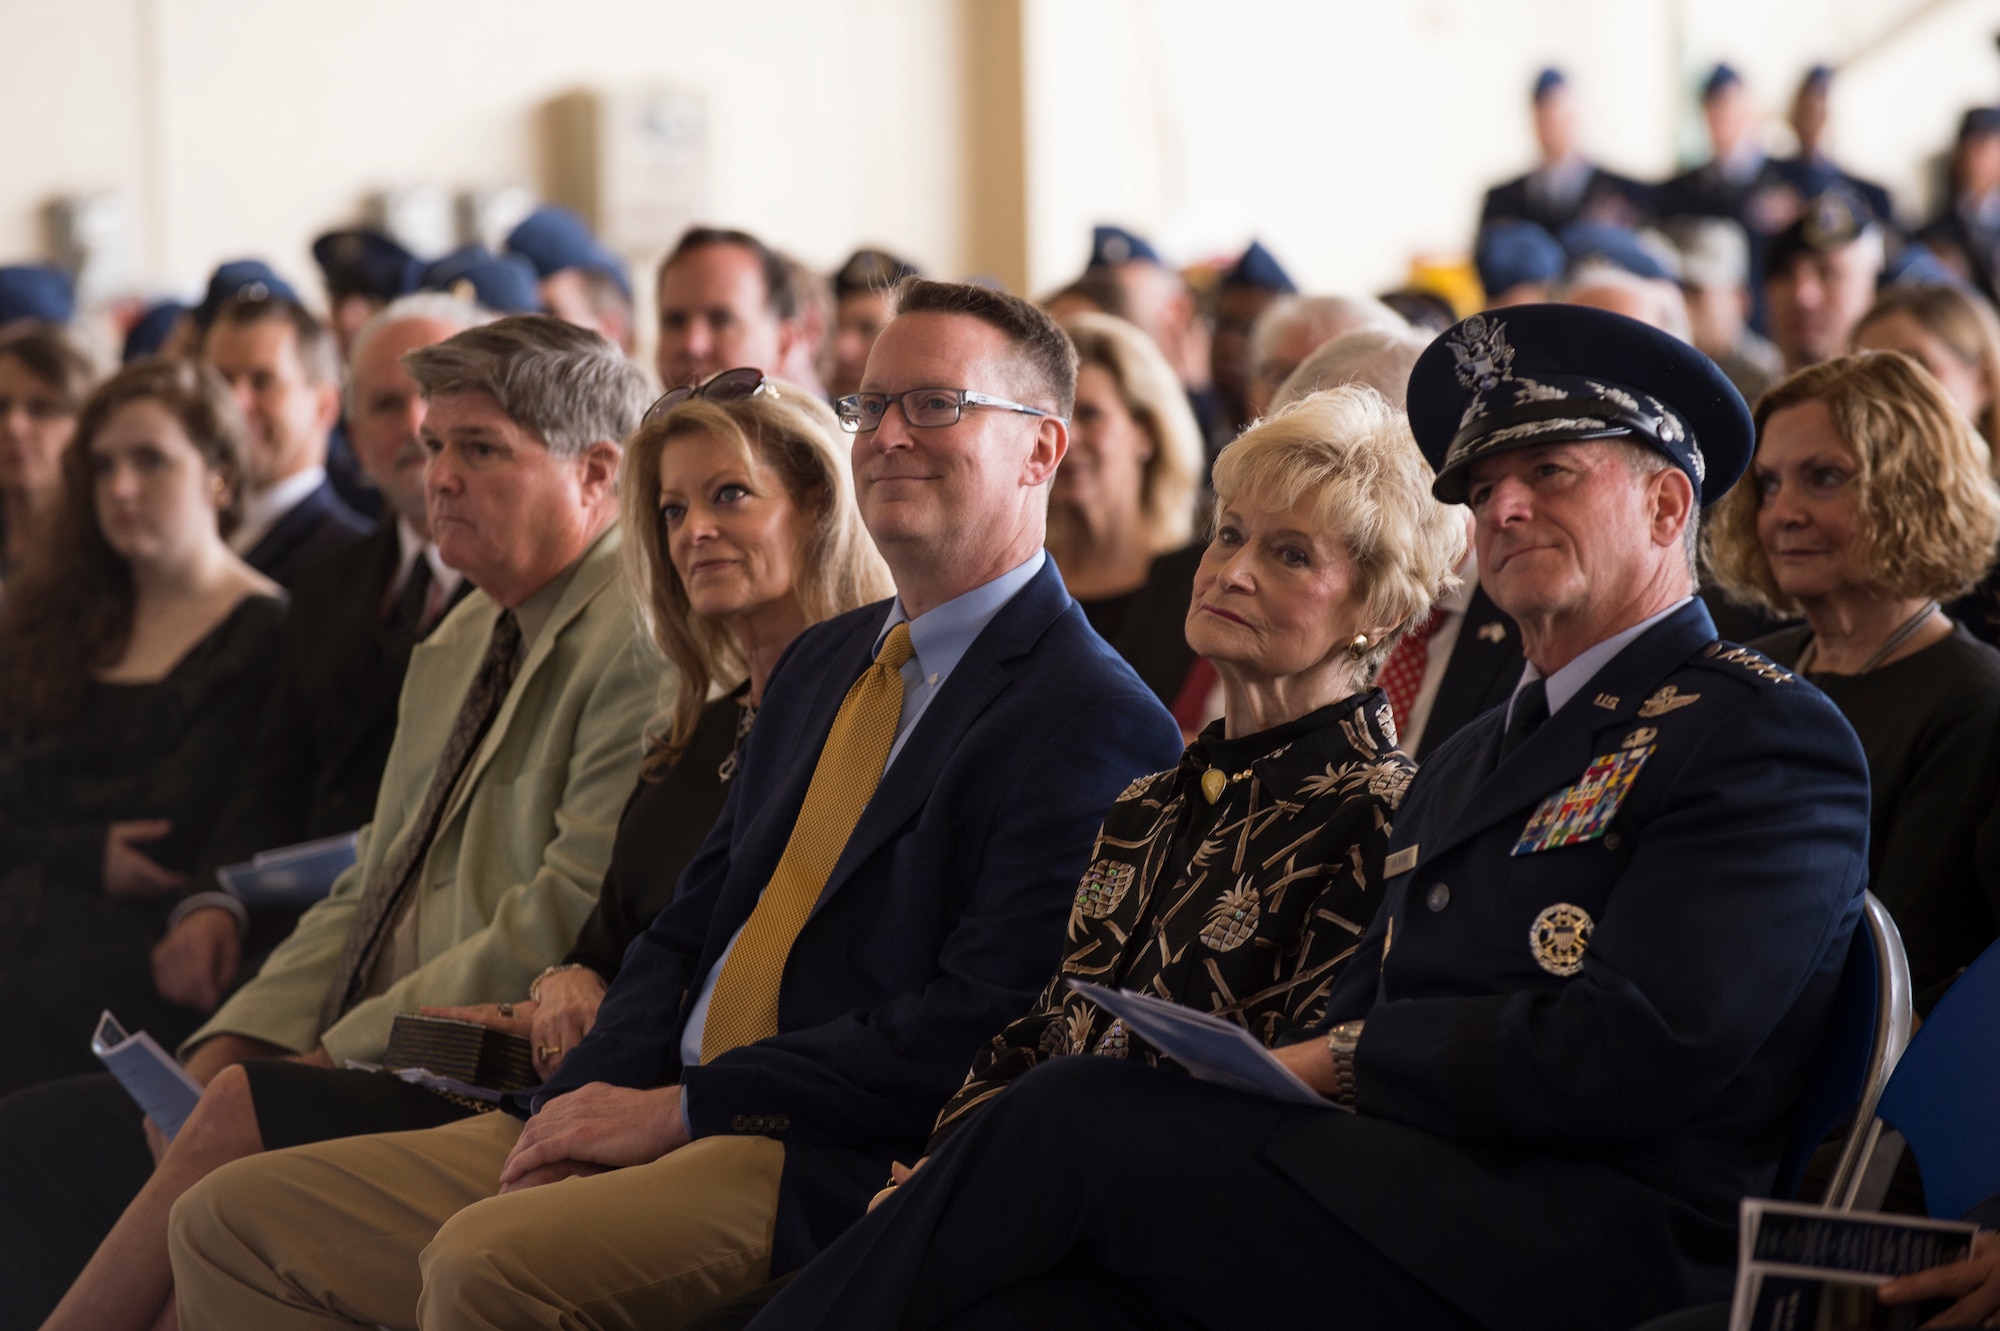 Family of the late Mr. W. Parker Greene and Air Force Chief of Staff Gen. David L. Goldfein, right, listen to remarks during a Celebration of Life ceremony honoring Mr. Greene, March 14, 2019, at Moody Air Force Base, Ga. Greene, a steadfast Air Force advocate and one of the most influential military civic leaders passed away Dec. 18, 2018. (U.S. Air Force Photo by Andrea Jenkins)